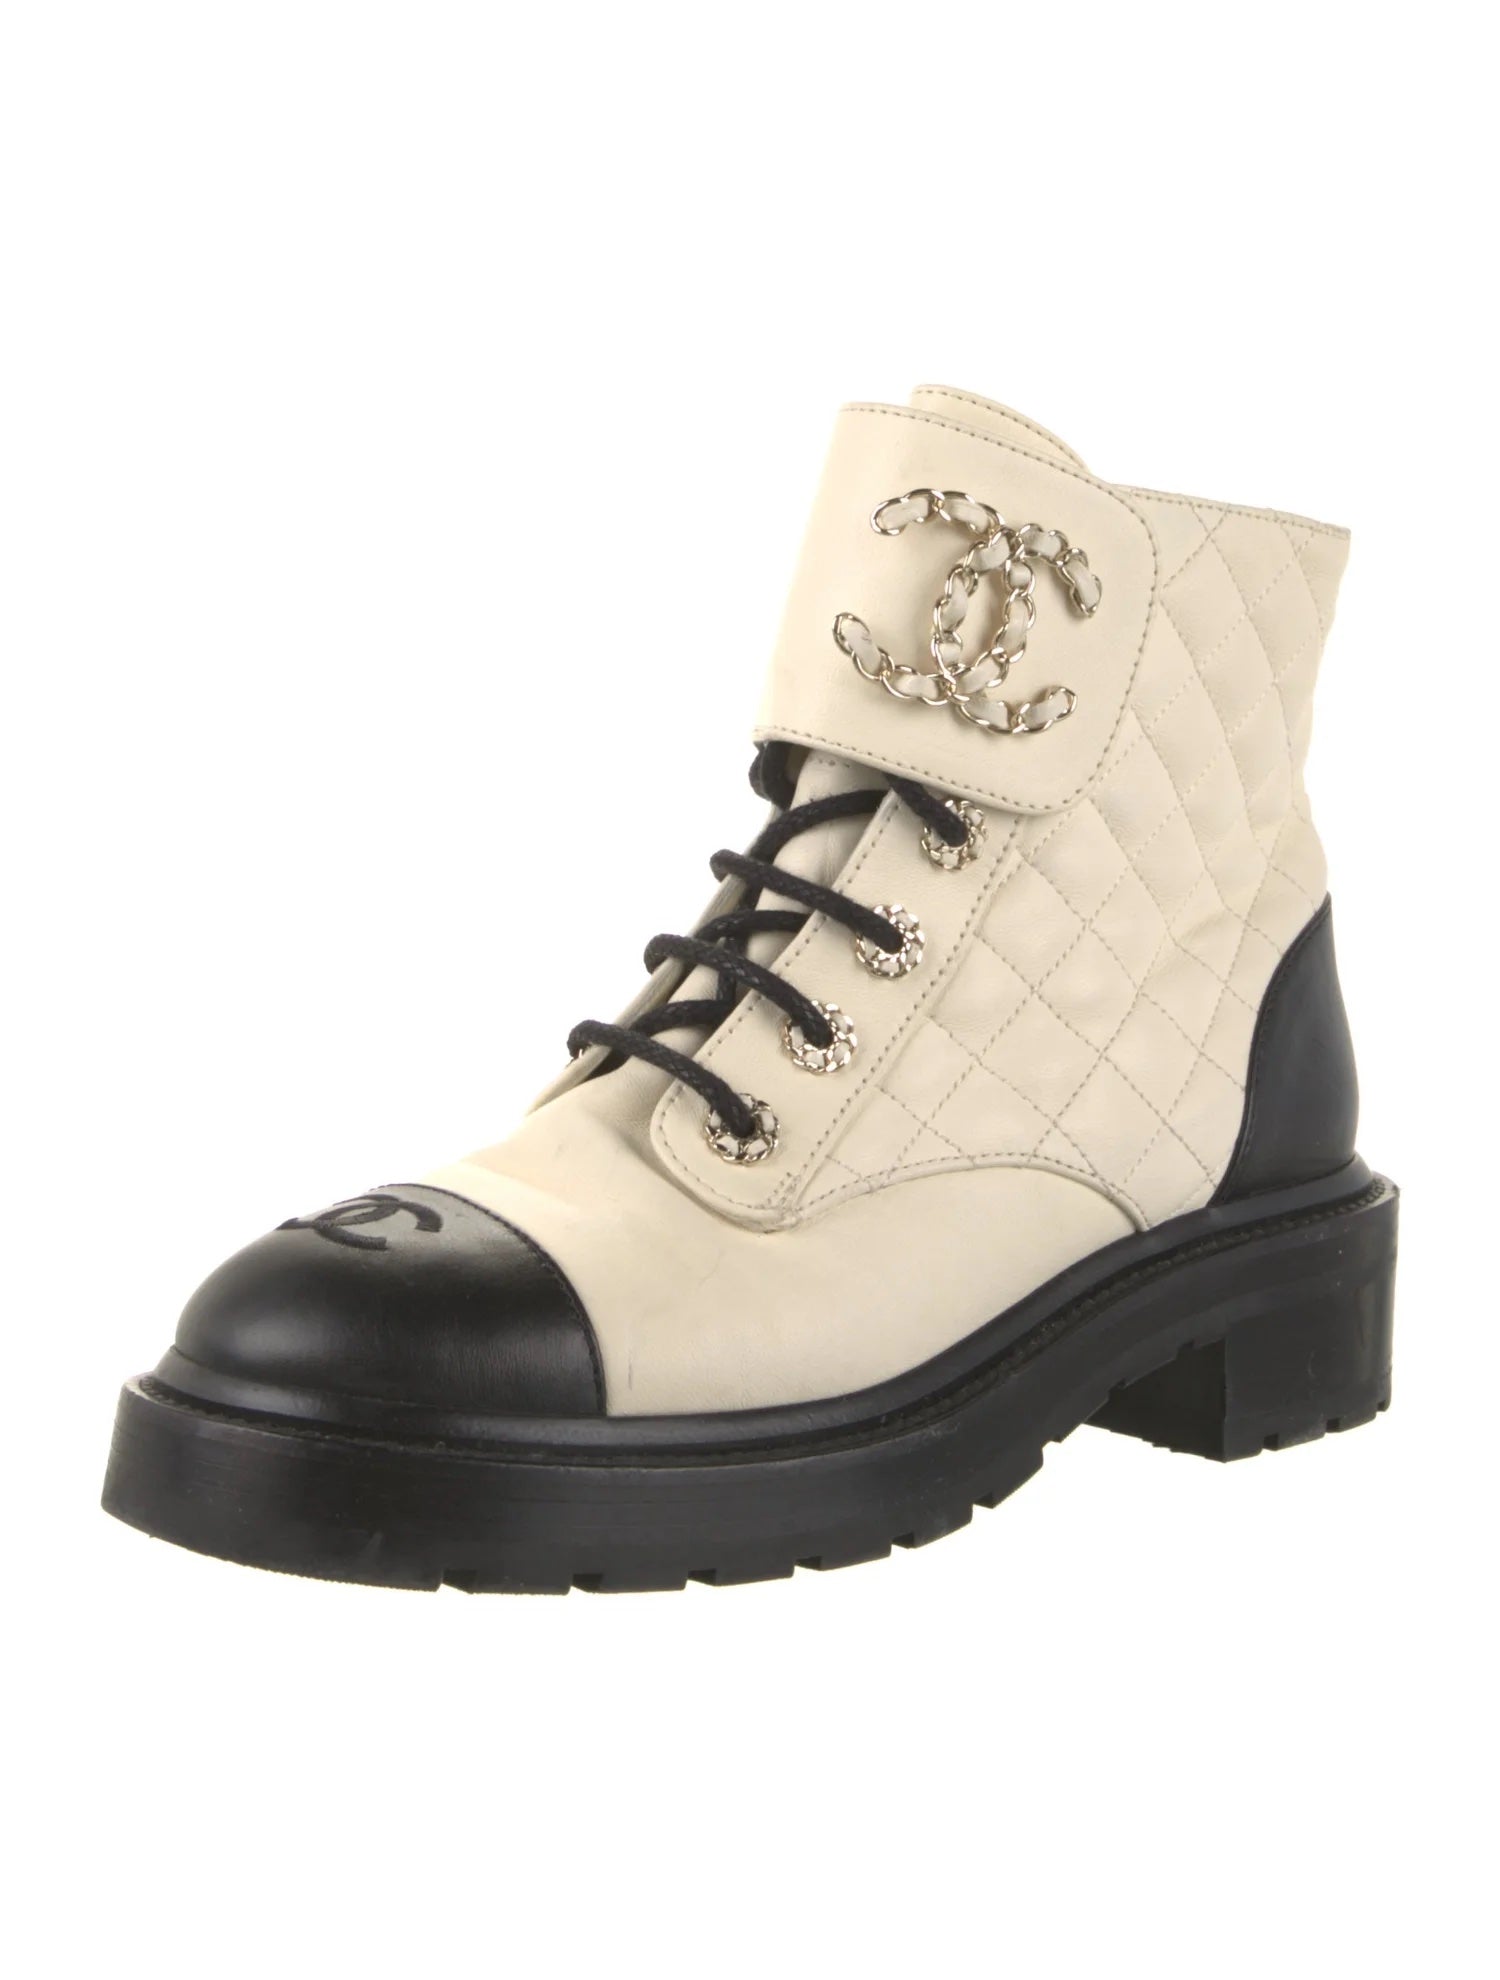 CHANEL Caviar Calfskin Quilted Chain Lace Up Combat Boots 35.5 White Black  1240880